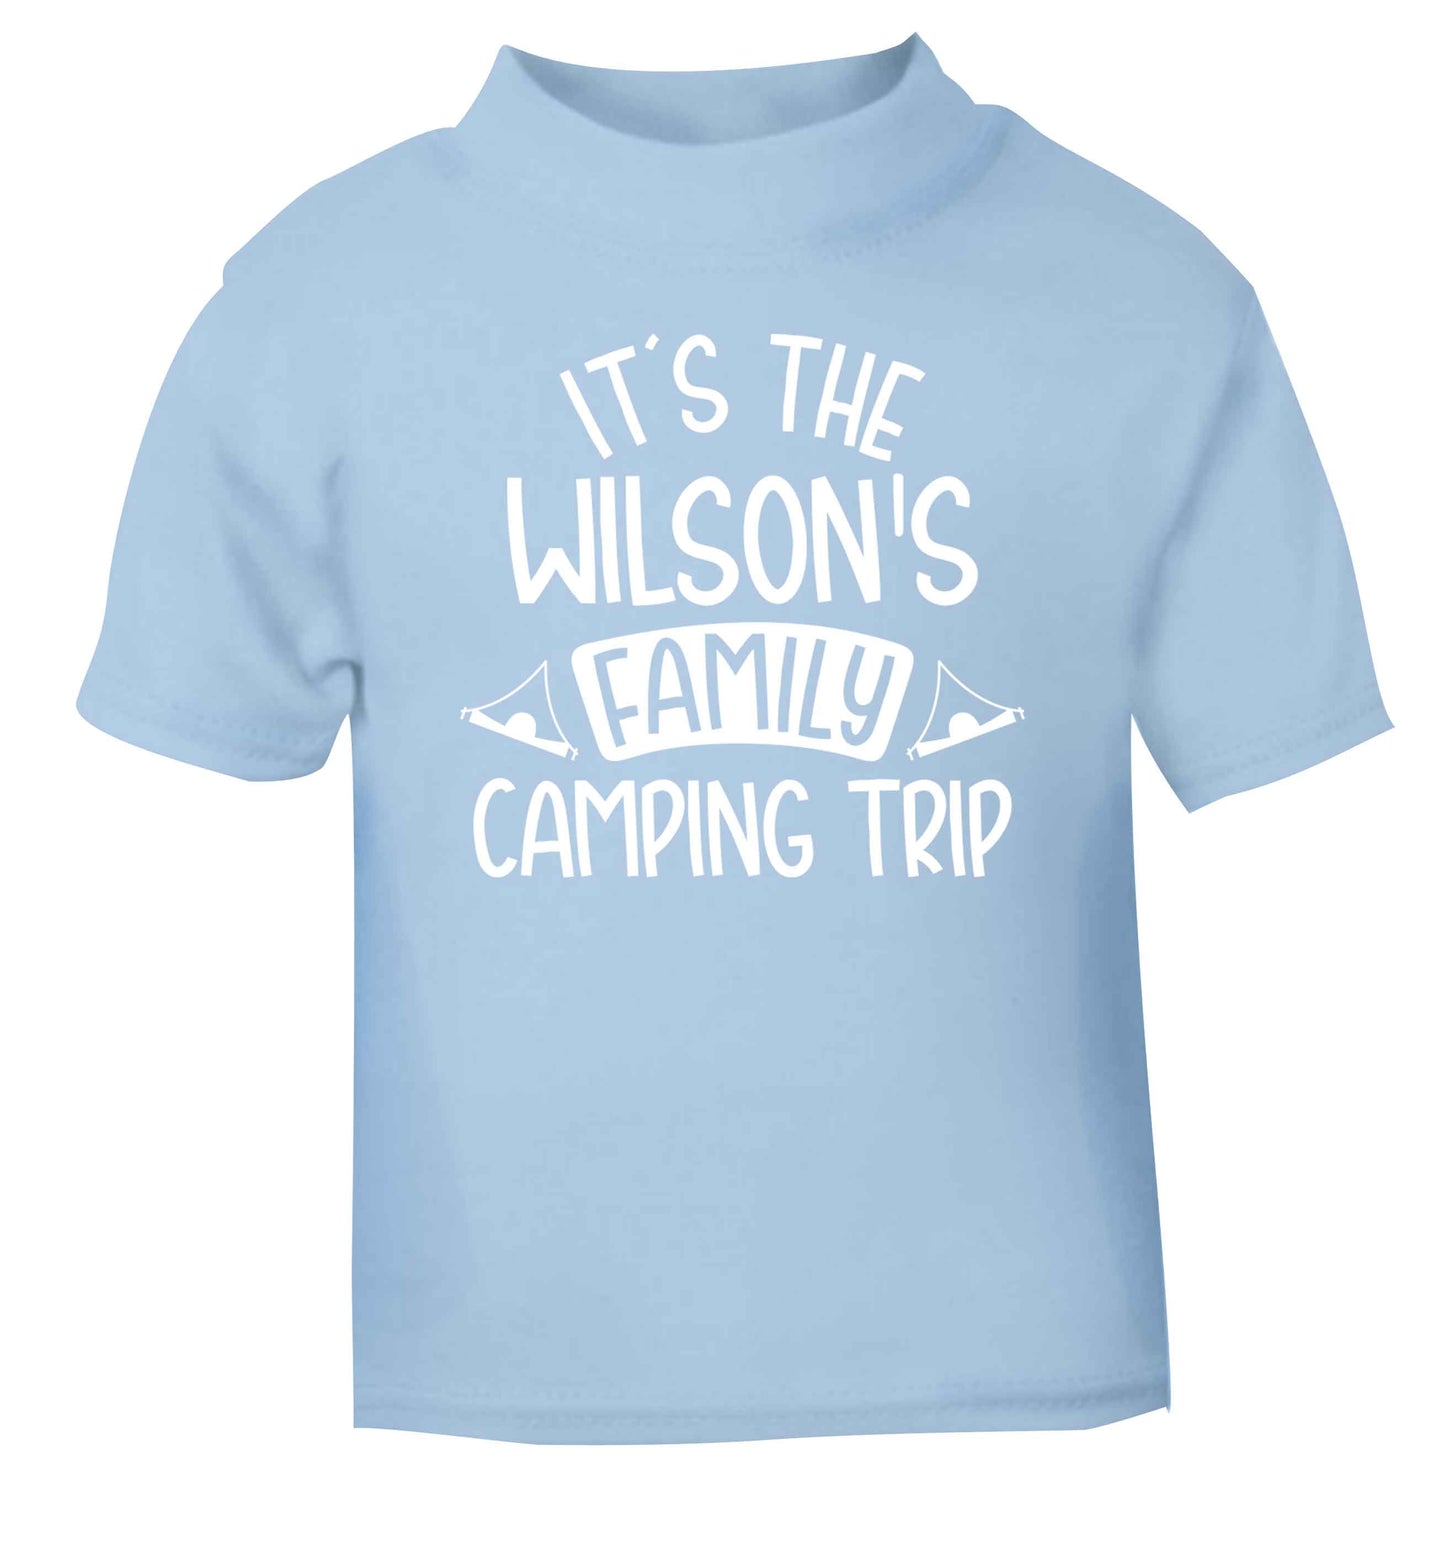 It's the Wilson's family camping trip personalised light blue Baby Toddler Tshirt 2 Years